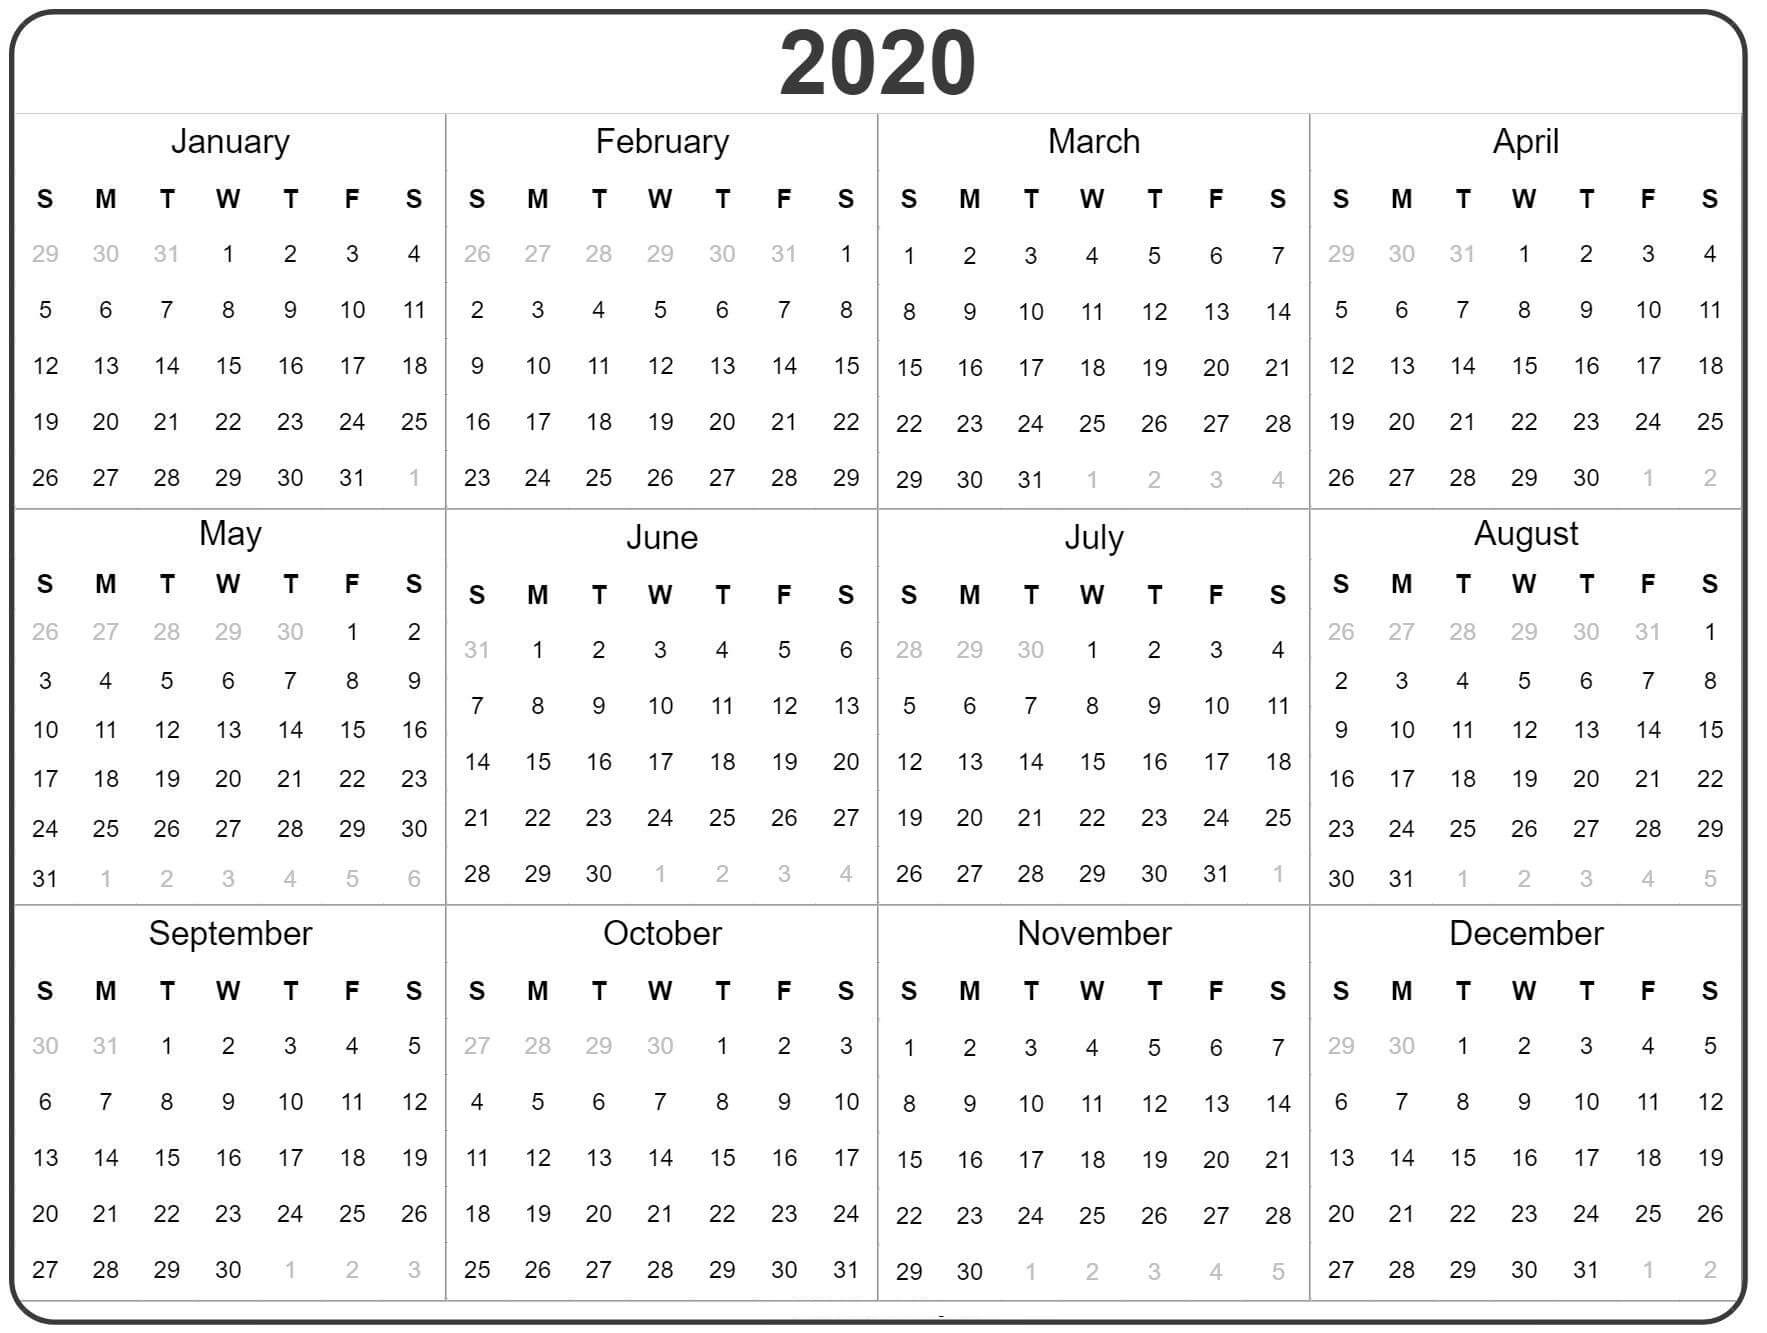 Free Yearly Calendar 2020 With Notes - 2019 Calendars For Dashing At A Glance 2020 Calendar